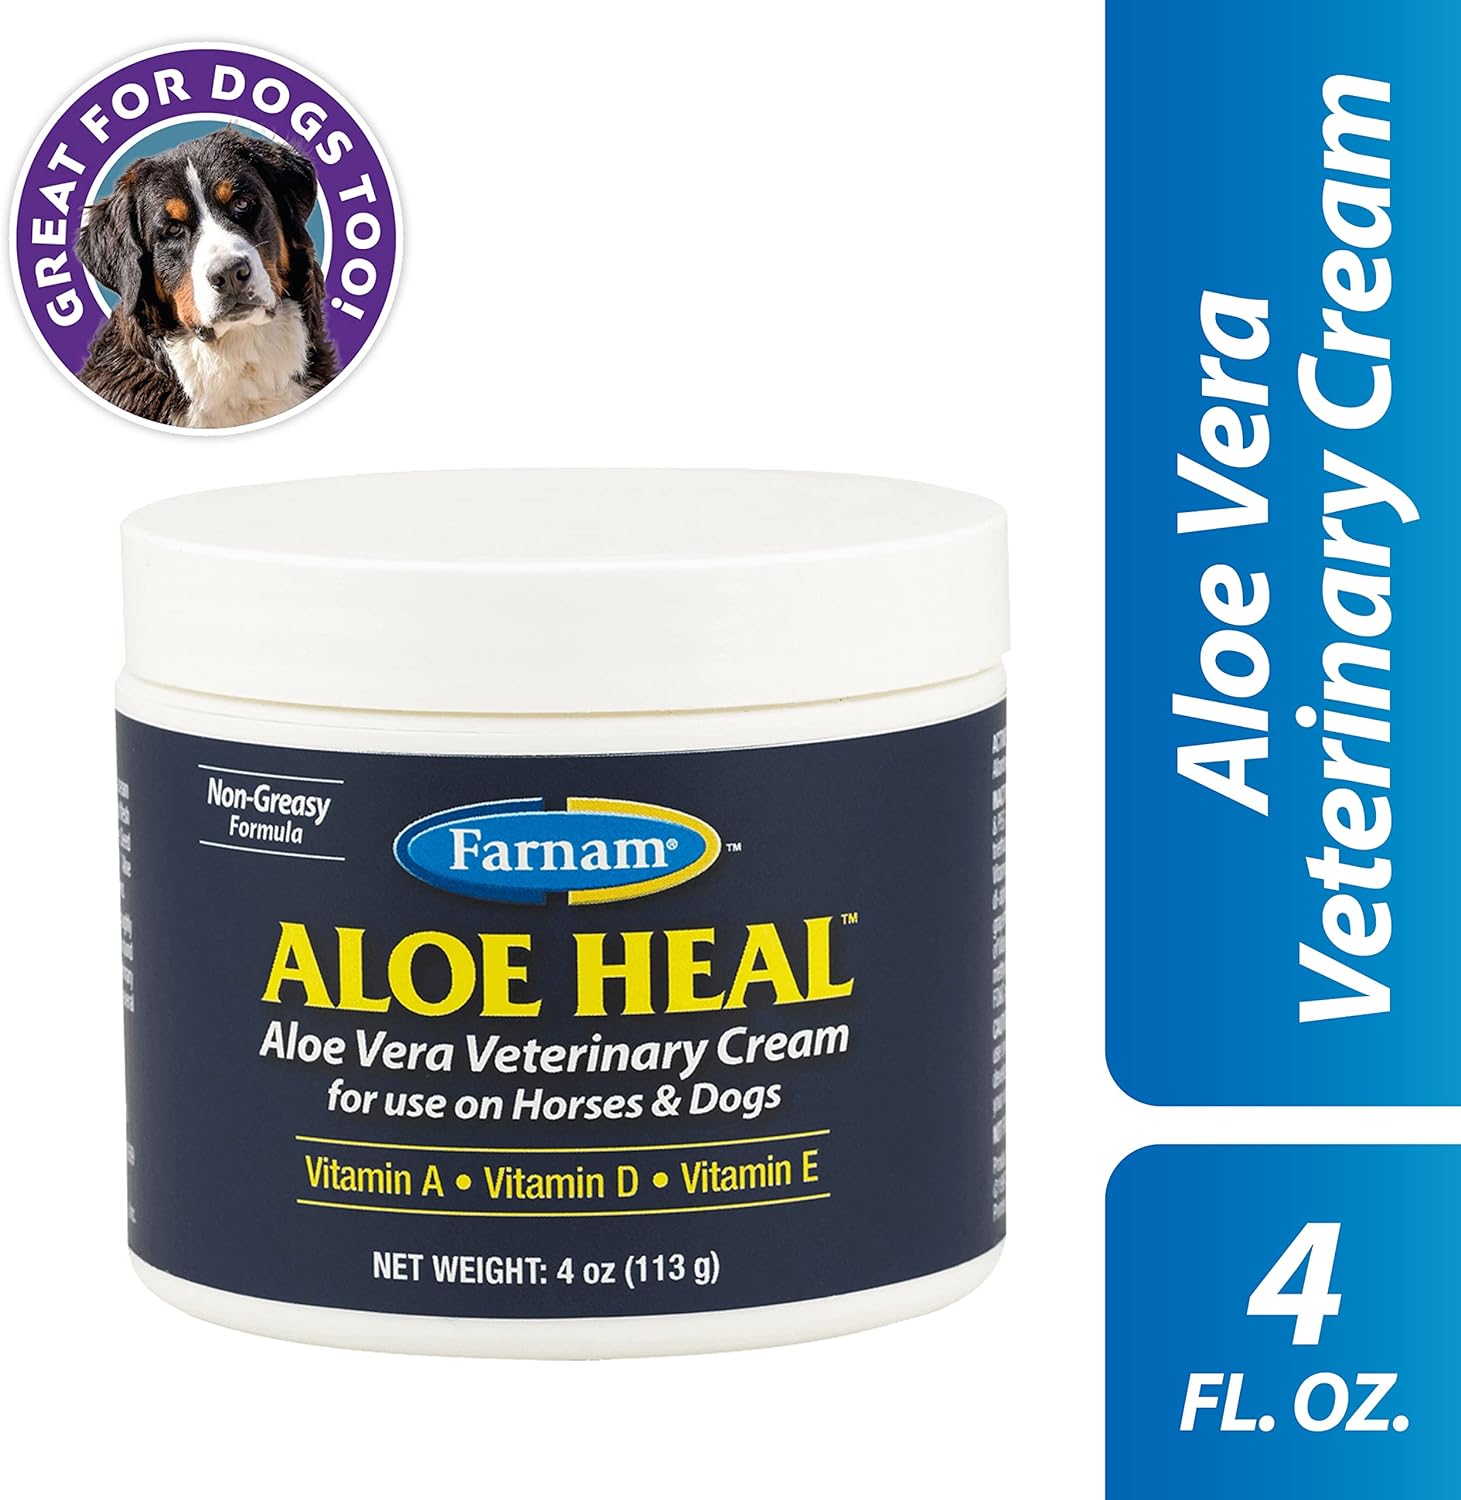 Farnam Aloe Heal Aloe Vera Veterinary Cream for use on Horses and Dogs 4 Ounces : Body Gels And Creams : Pet Supplies